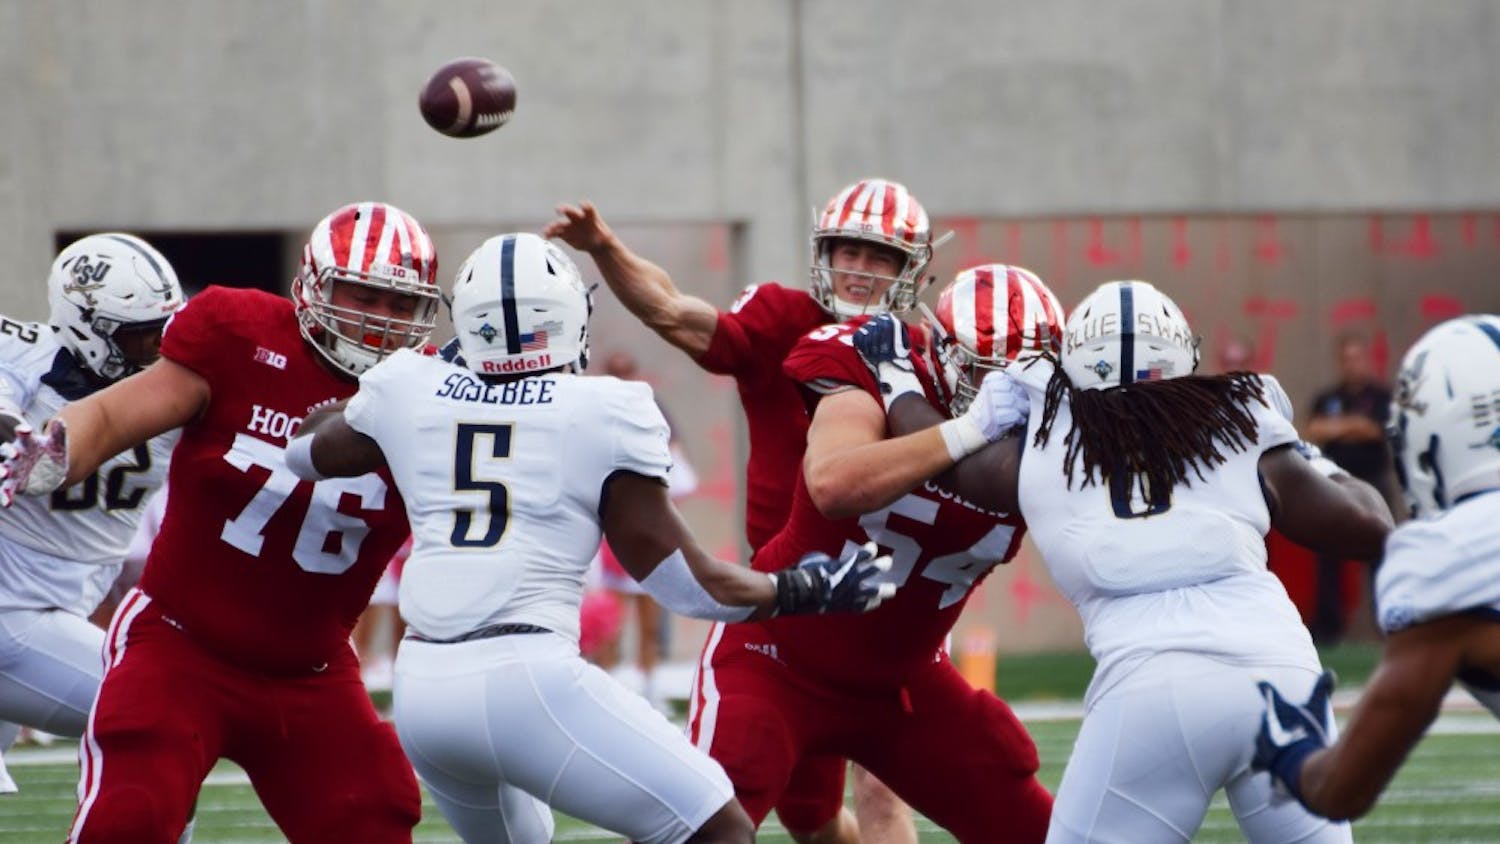 Sophomore quarterback Peyton Ramsey throws the ball towards the goal line during the first quarter of the game against Charleston Southern on Oct. 7. IU will look to win its first Big Ten game this Saturday at Maryland.